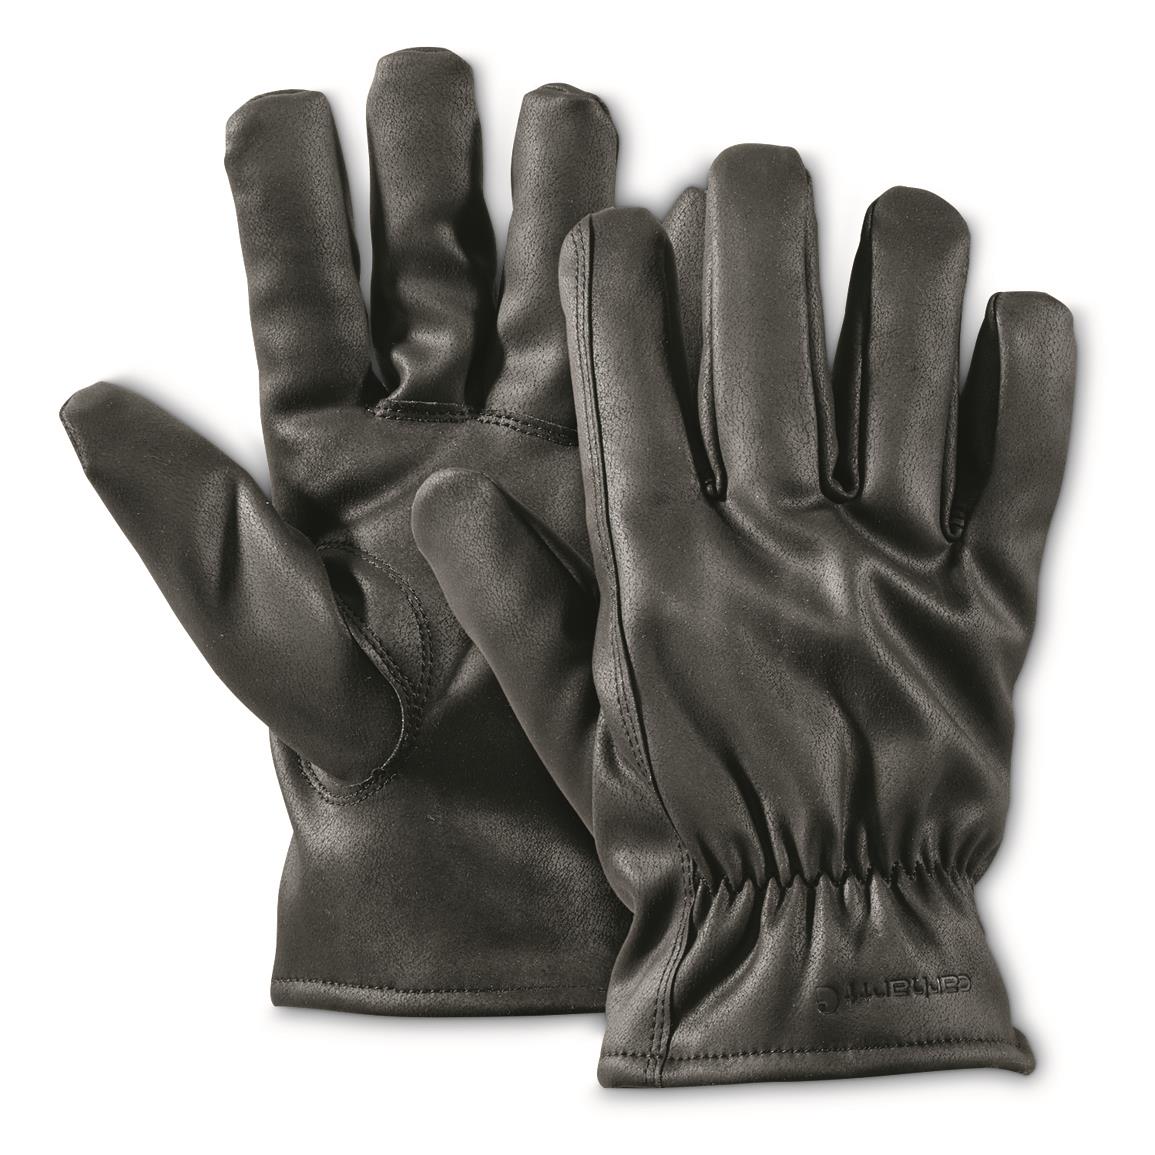 Carhartt Insulated Driver Gloves, Black